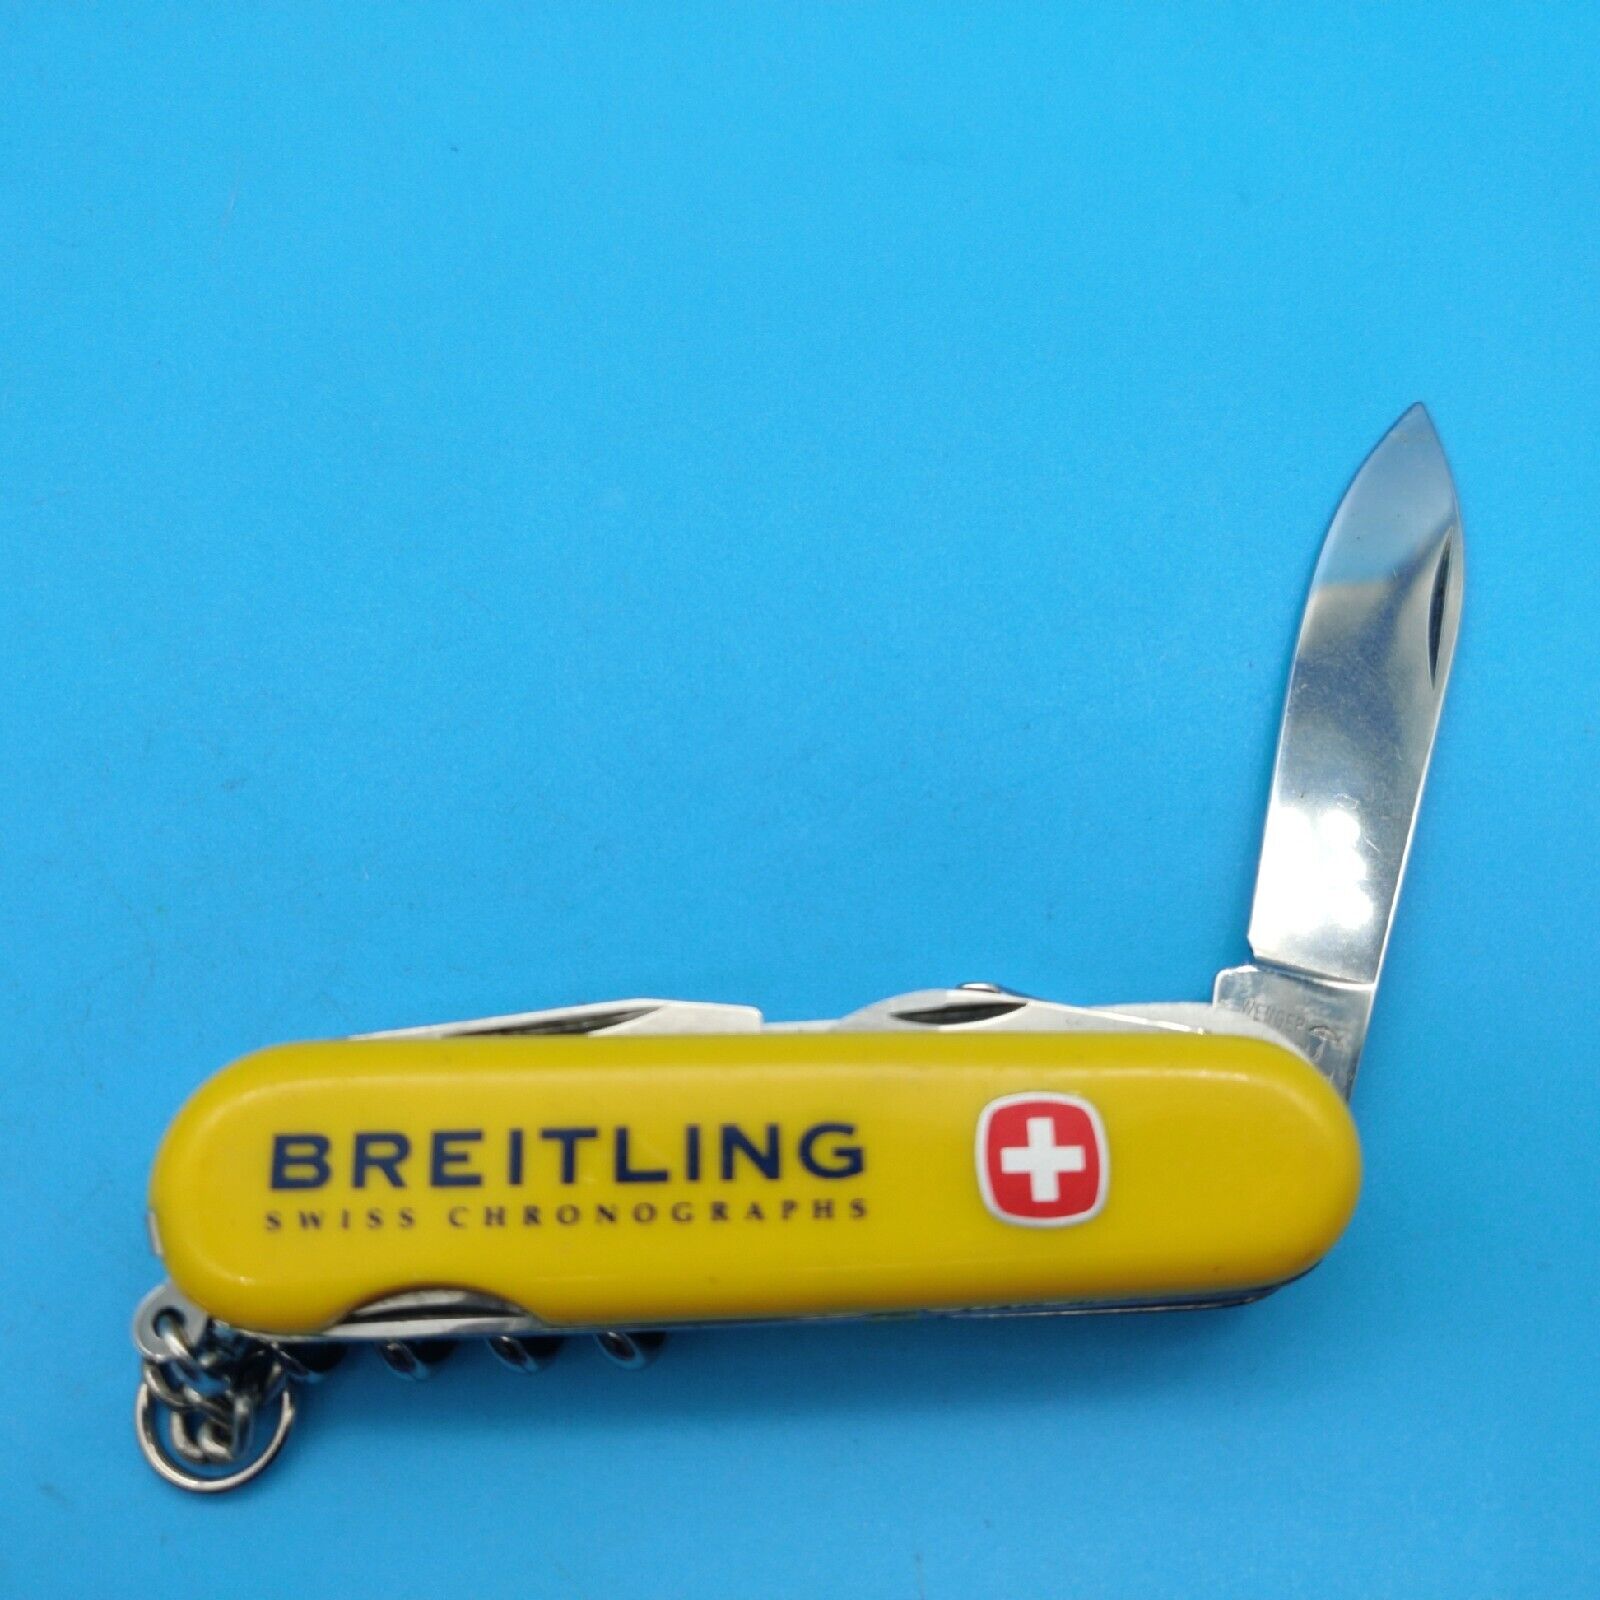 Breitling Watch Pocket Knife - Authentic Breitling Tote - WENGER Swiss Army